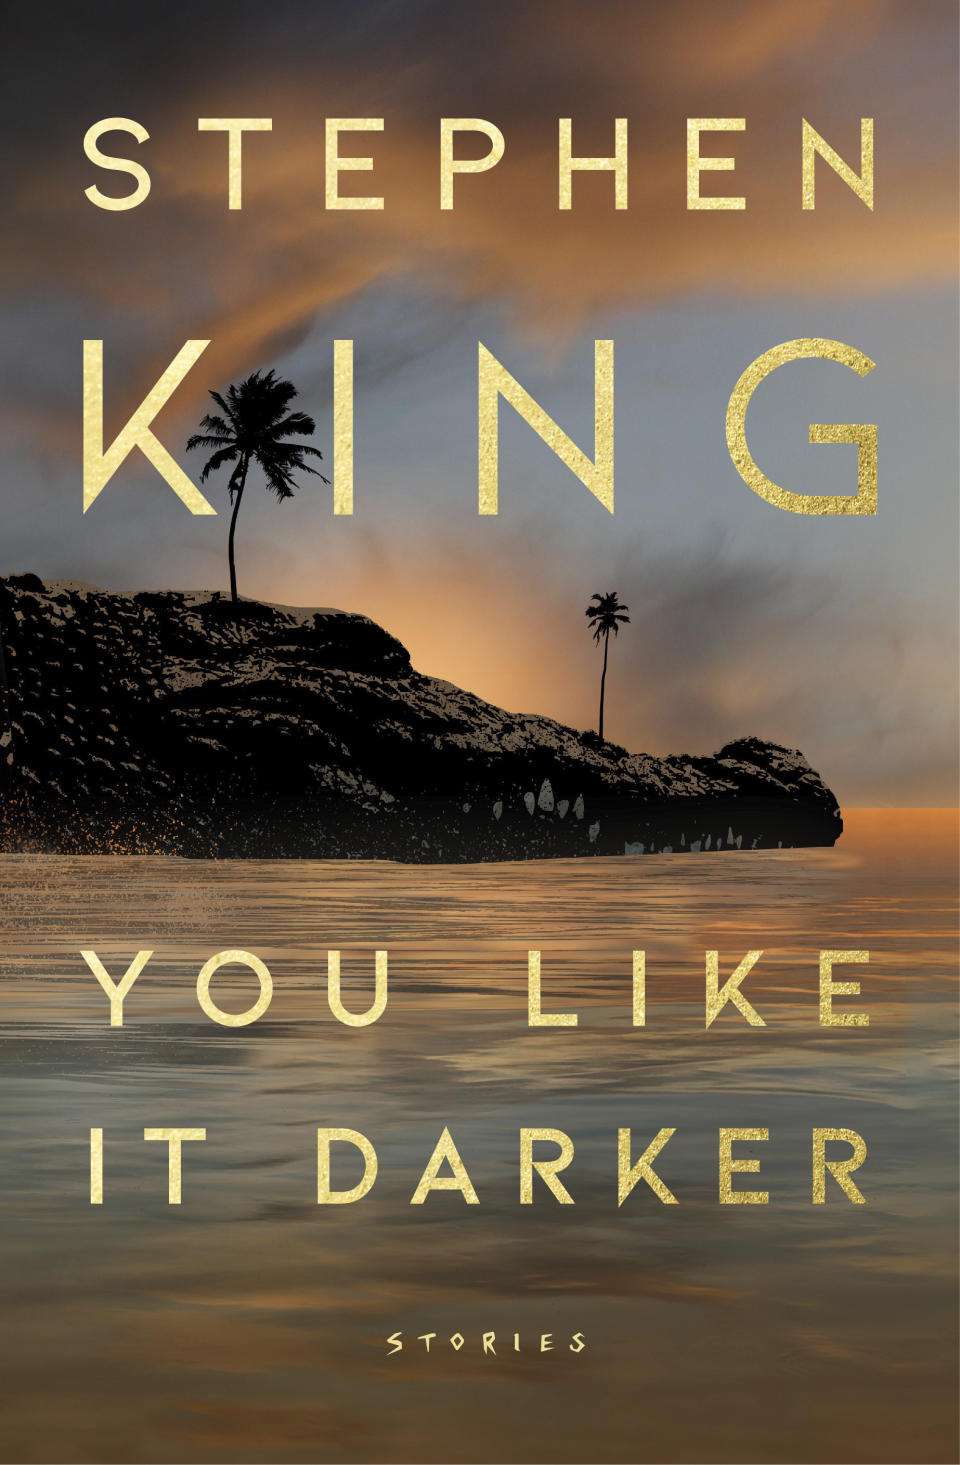 This cover image released by Scribner shows "You Like it Darker" by Stephen King. (Scribner via AP)